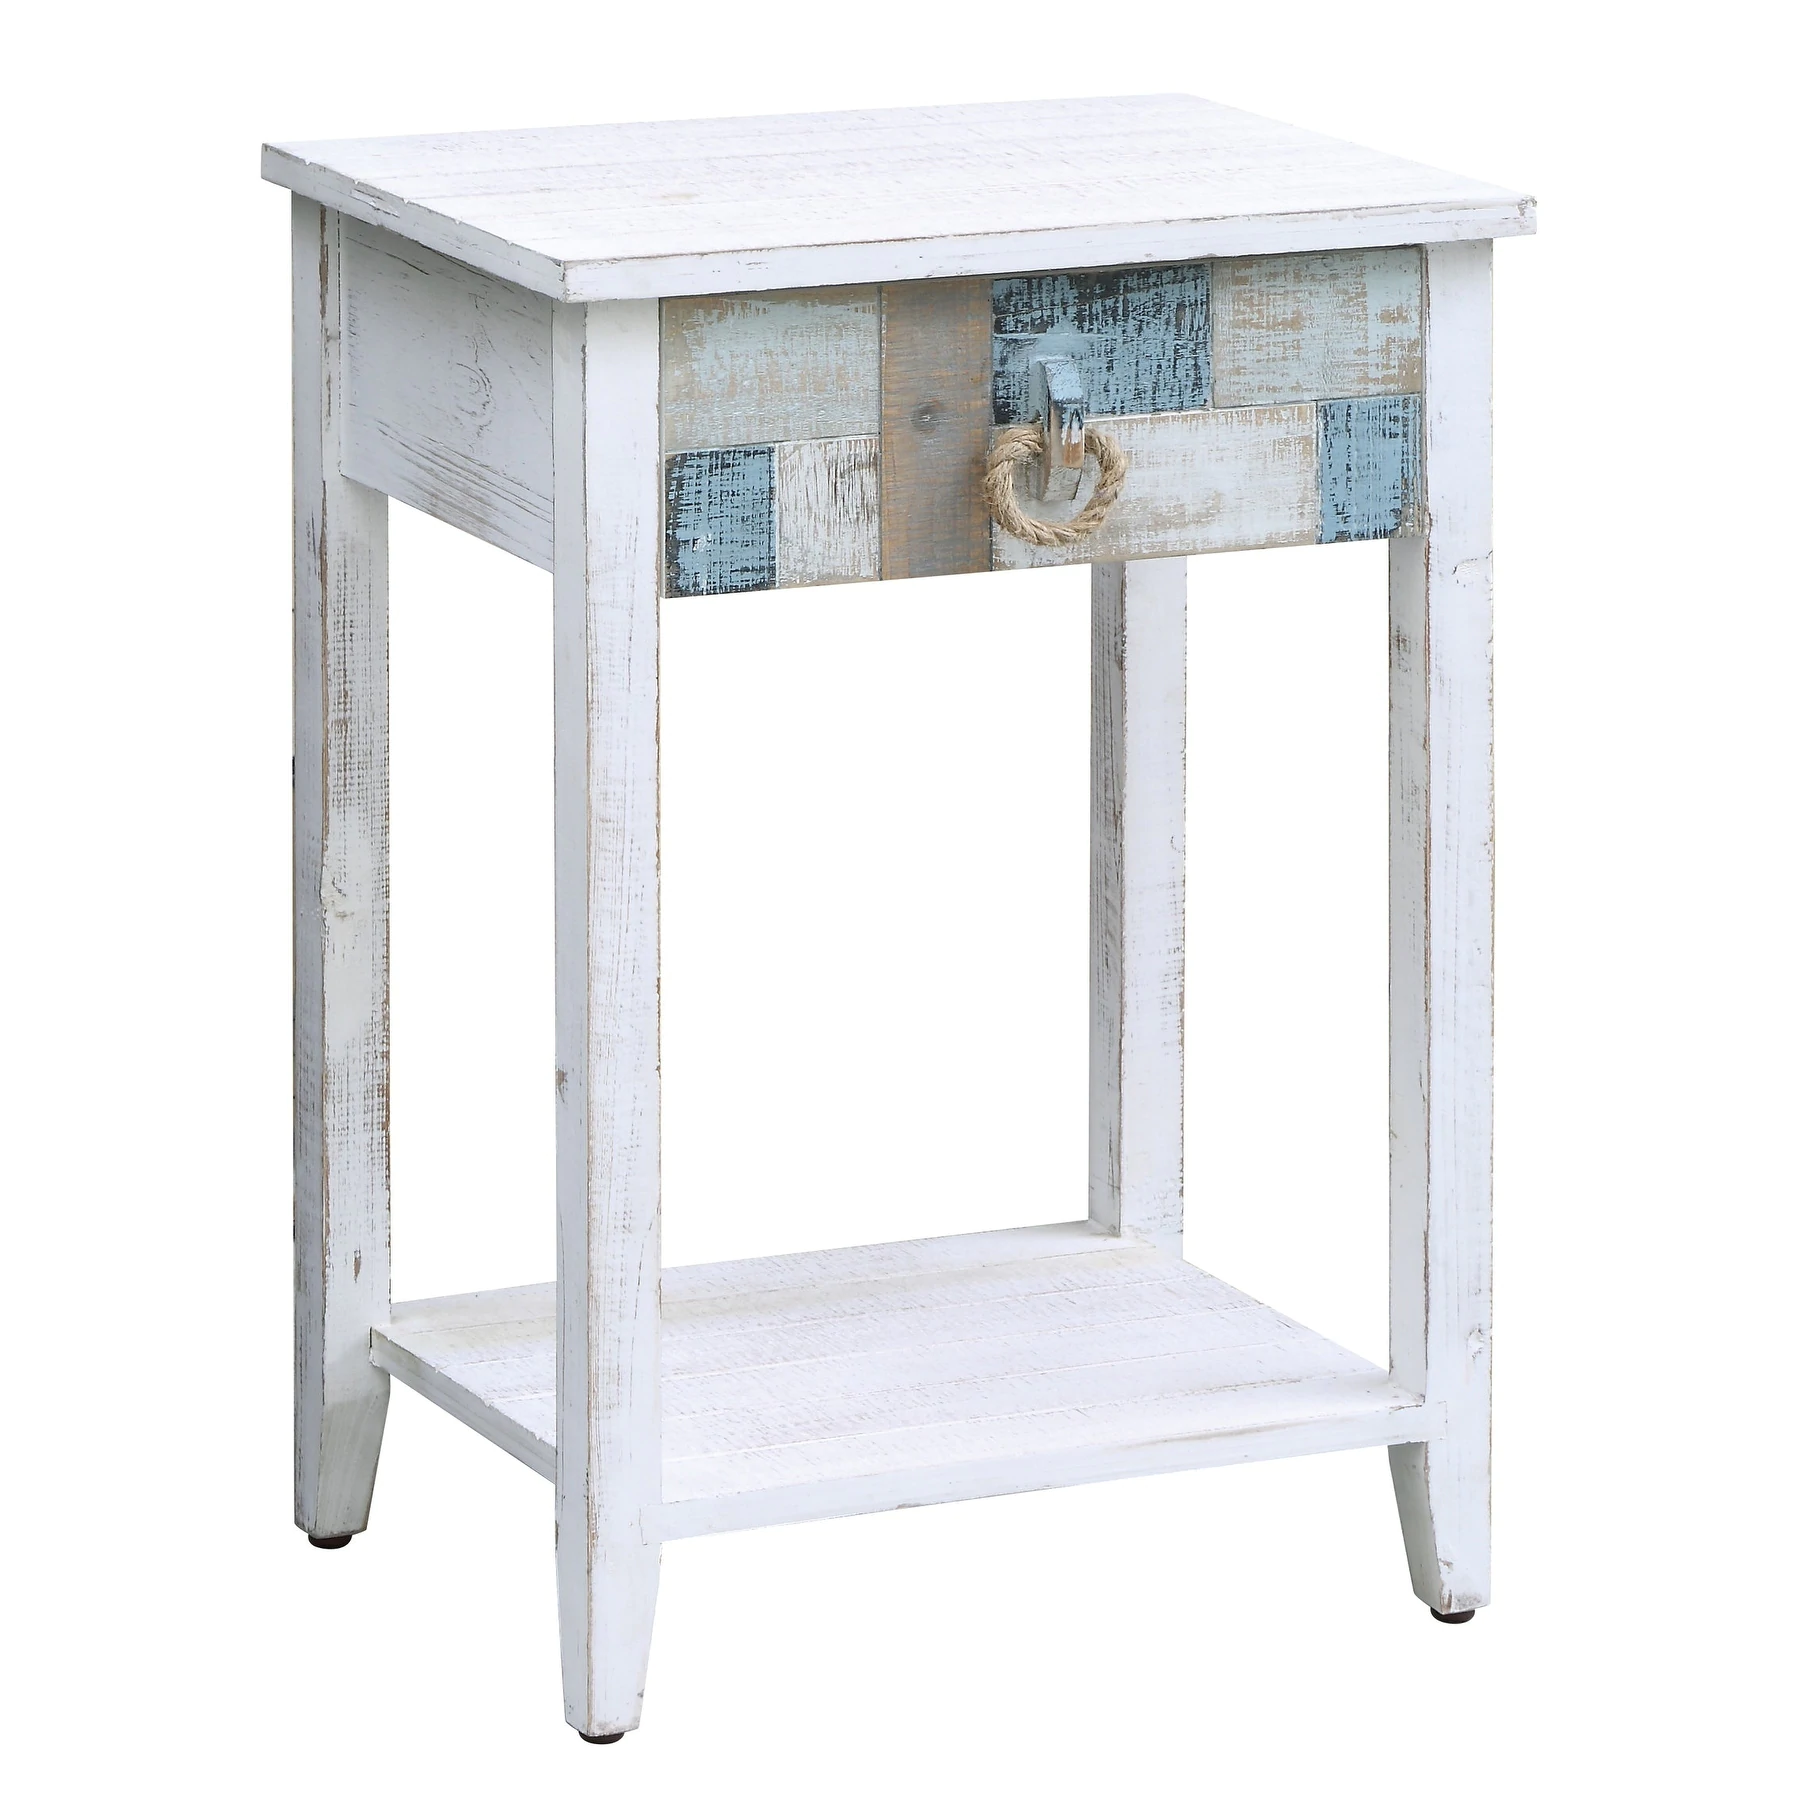 south shore multi color nautical patchwork drawer accent table free shipping today top dog bath tub extra wide floor threshold barnwood dining smoked glass coffee small bedside